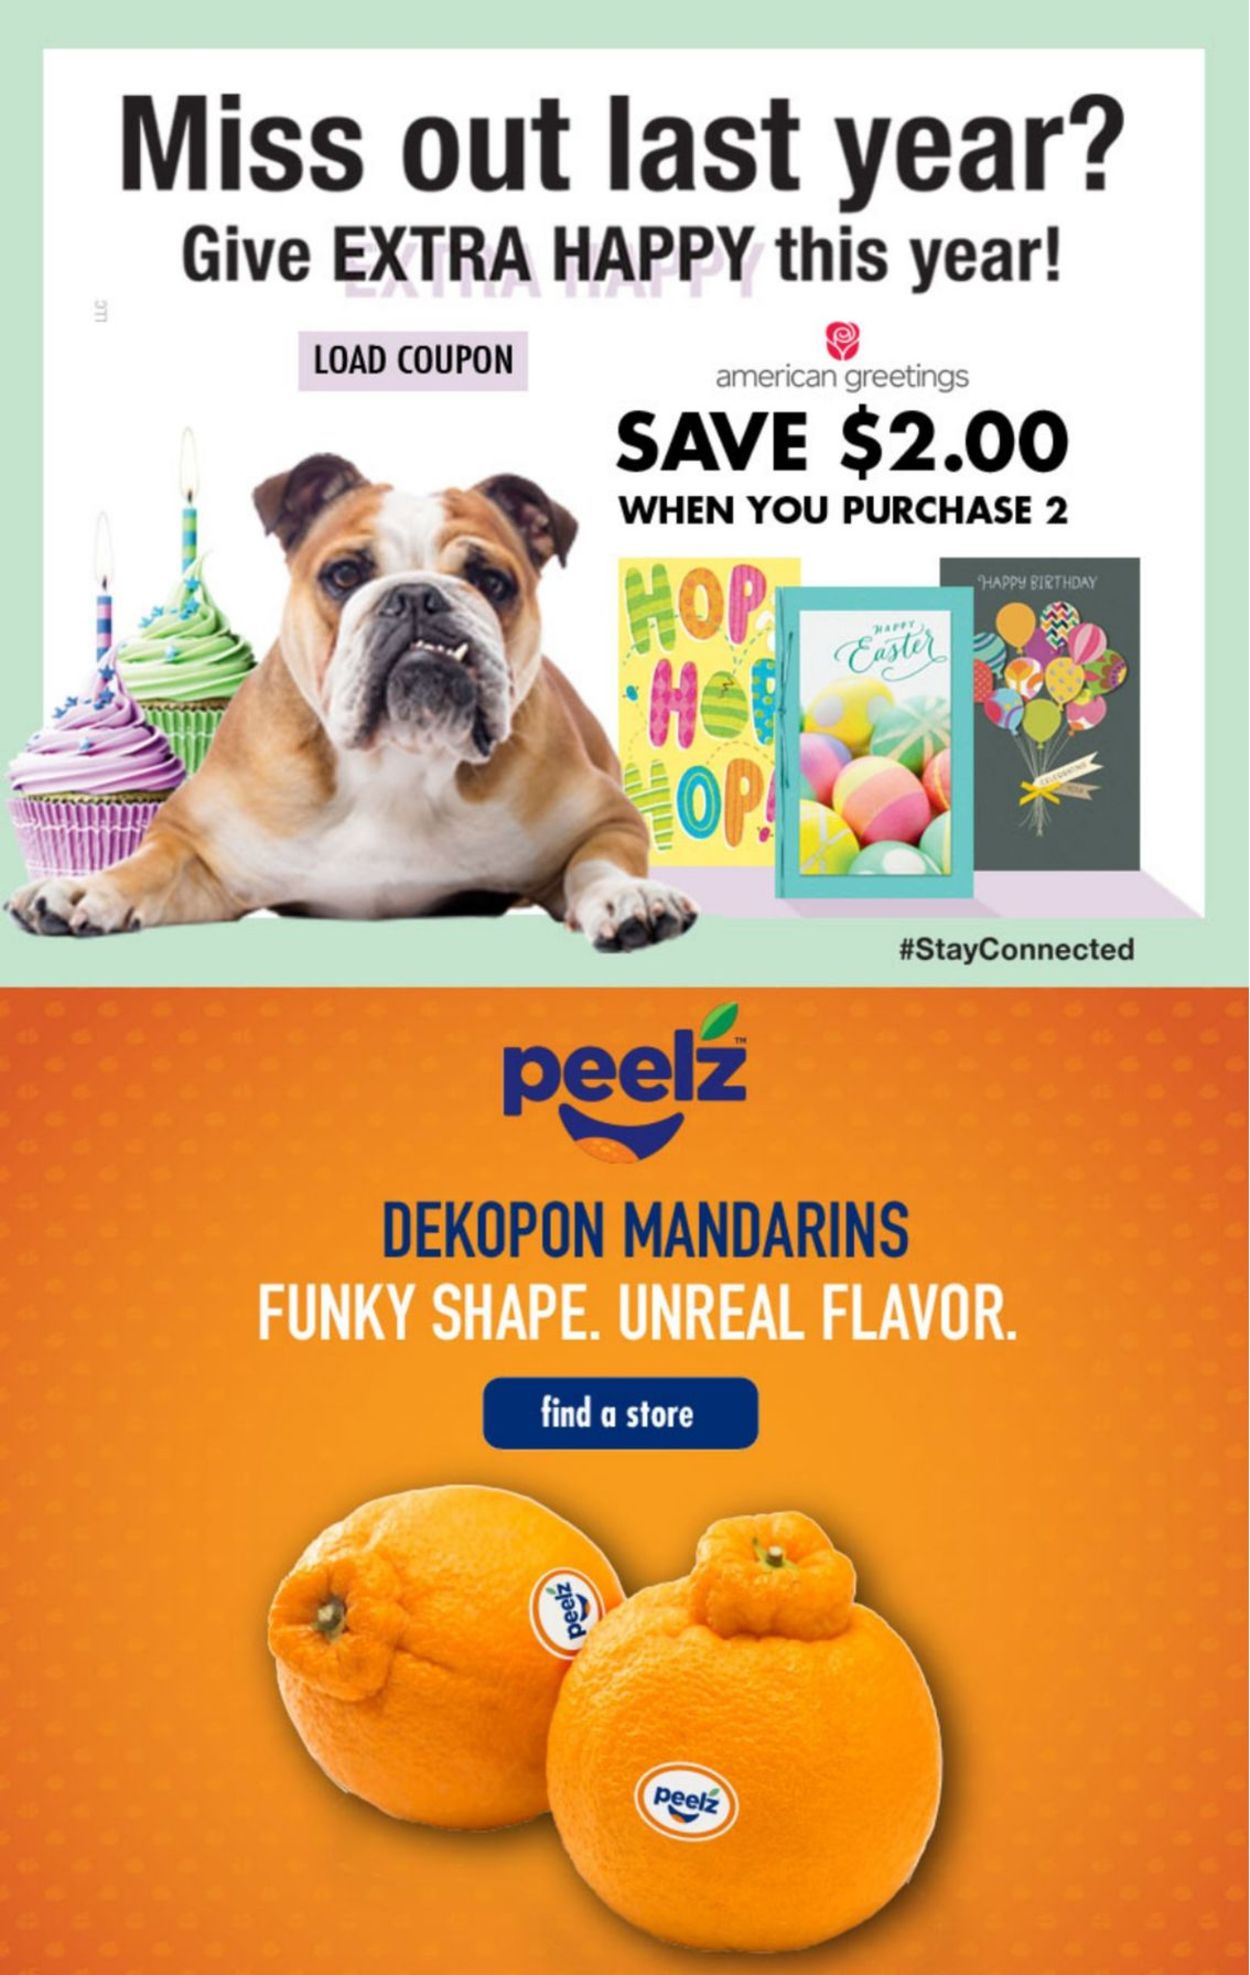 Catalogue Food Lion Easter 2021 ad from 03/31/2021